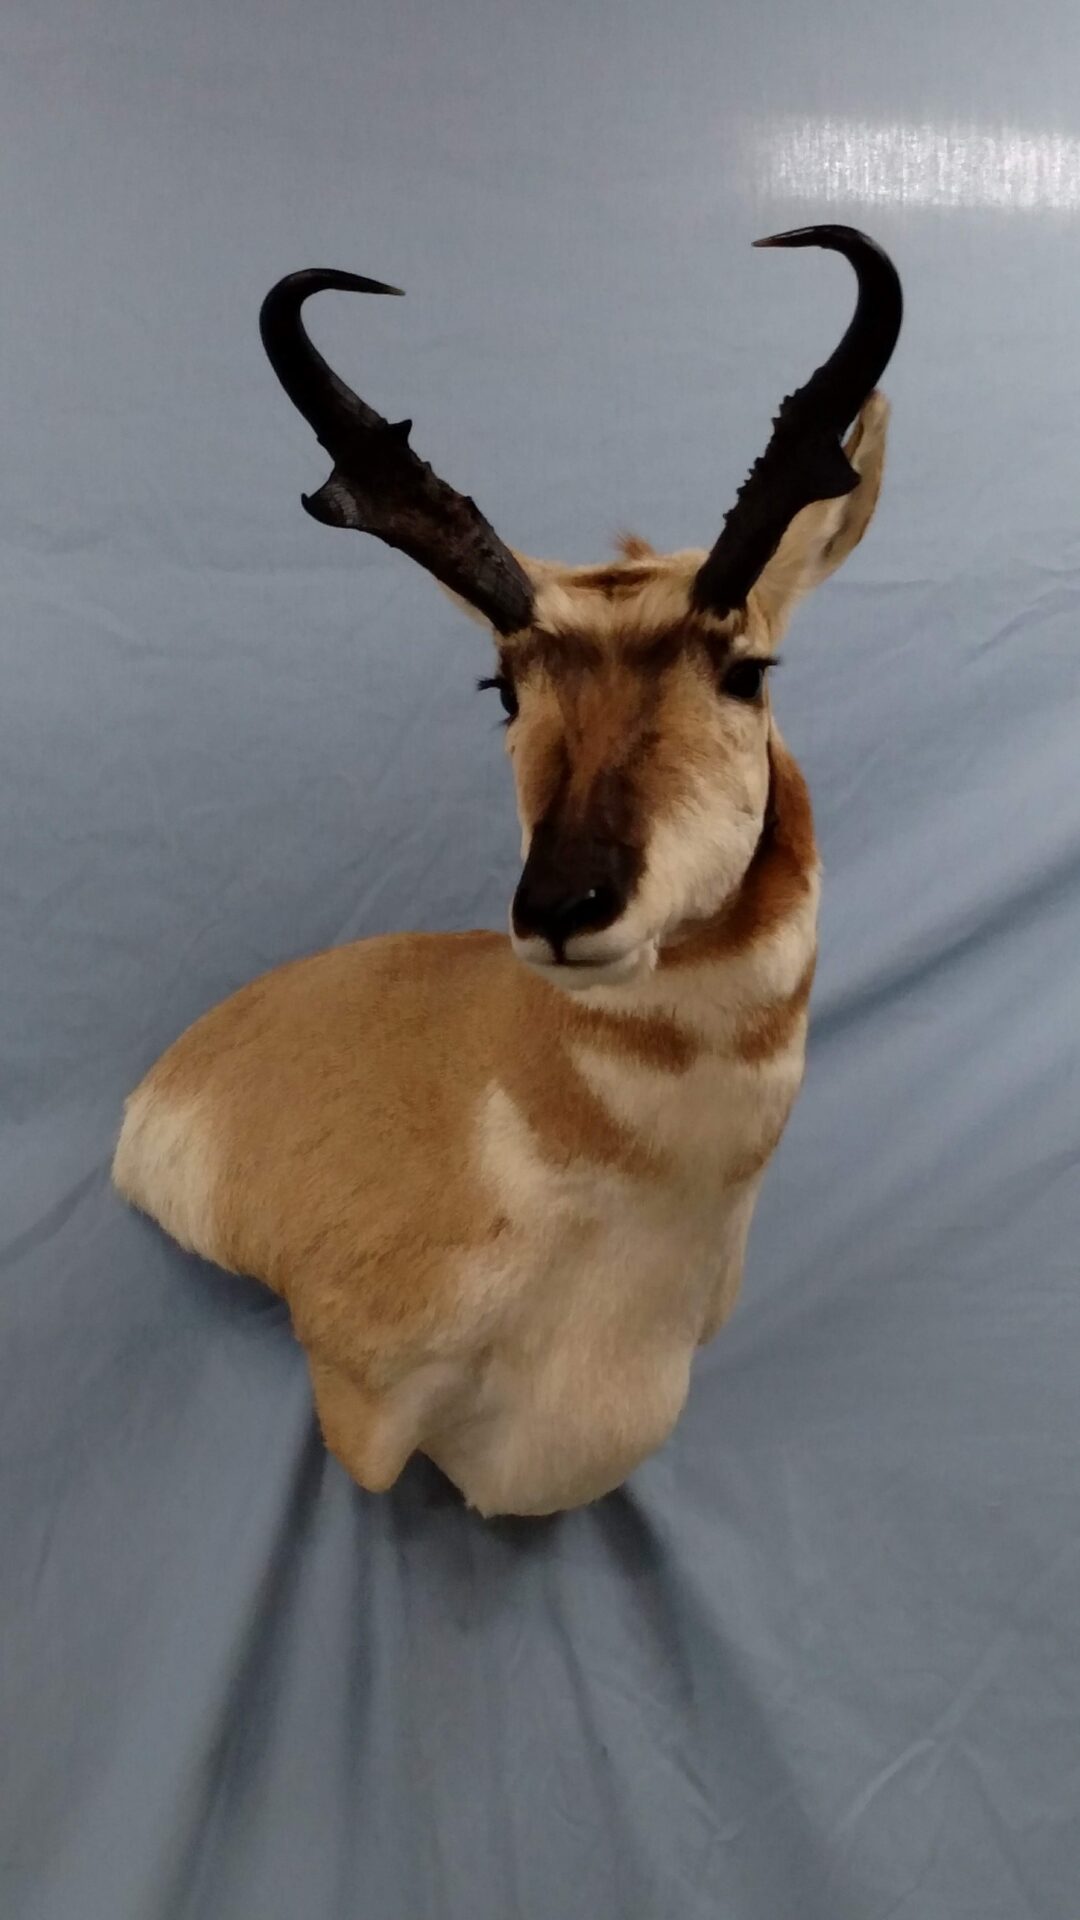 The antelope taxidermy have a life like presence in your walls